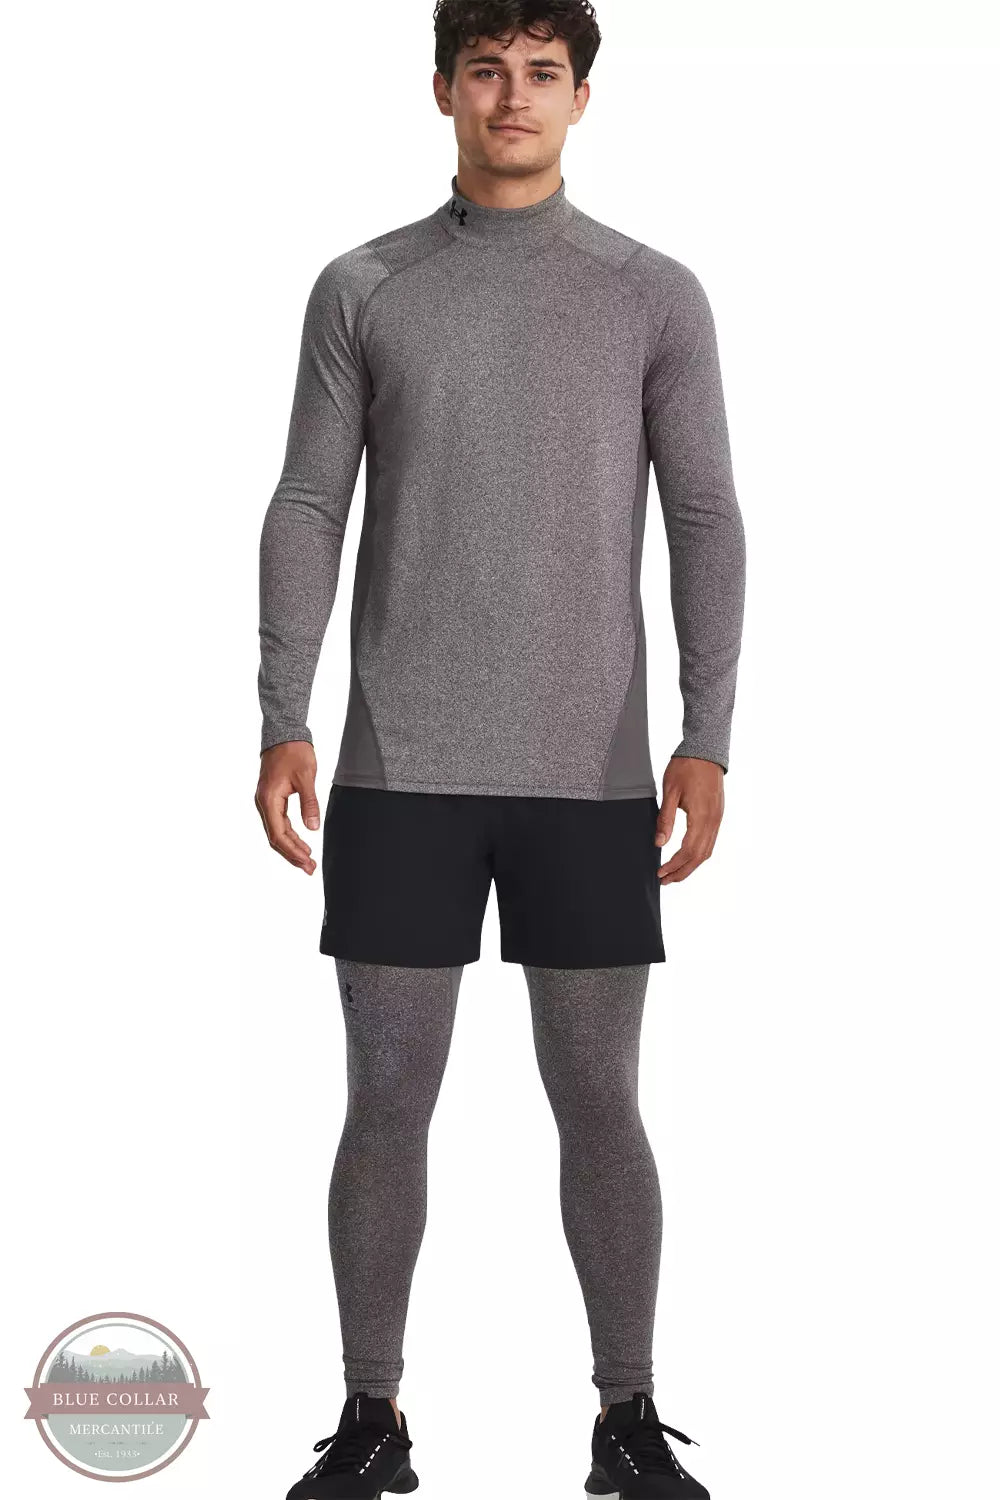 Under Armour 1366075-020 ColdGear Leggings in Charcoal Light Heather / Black Full View